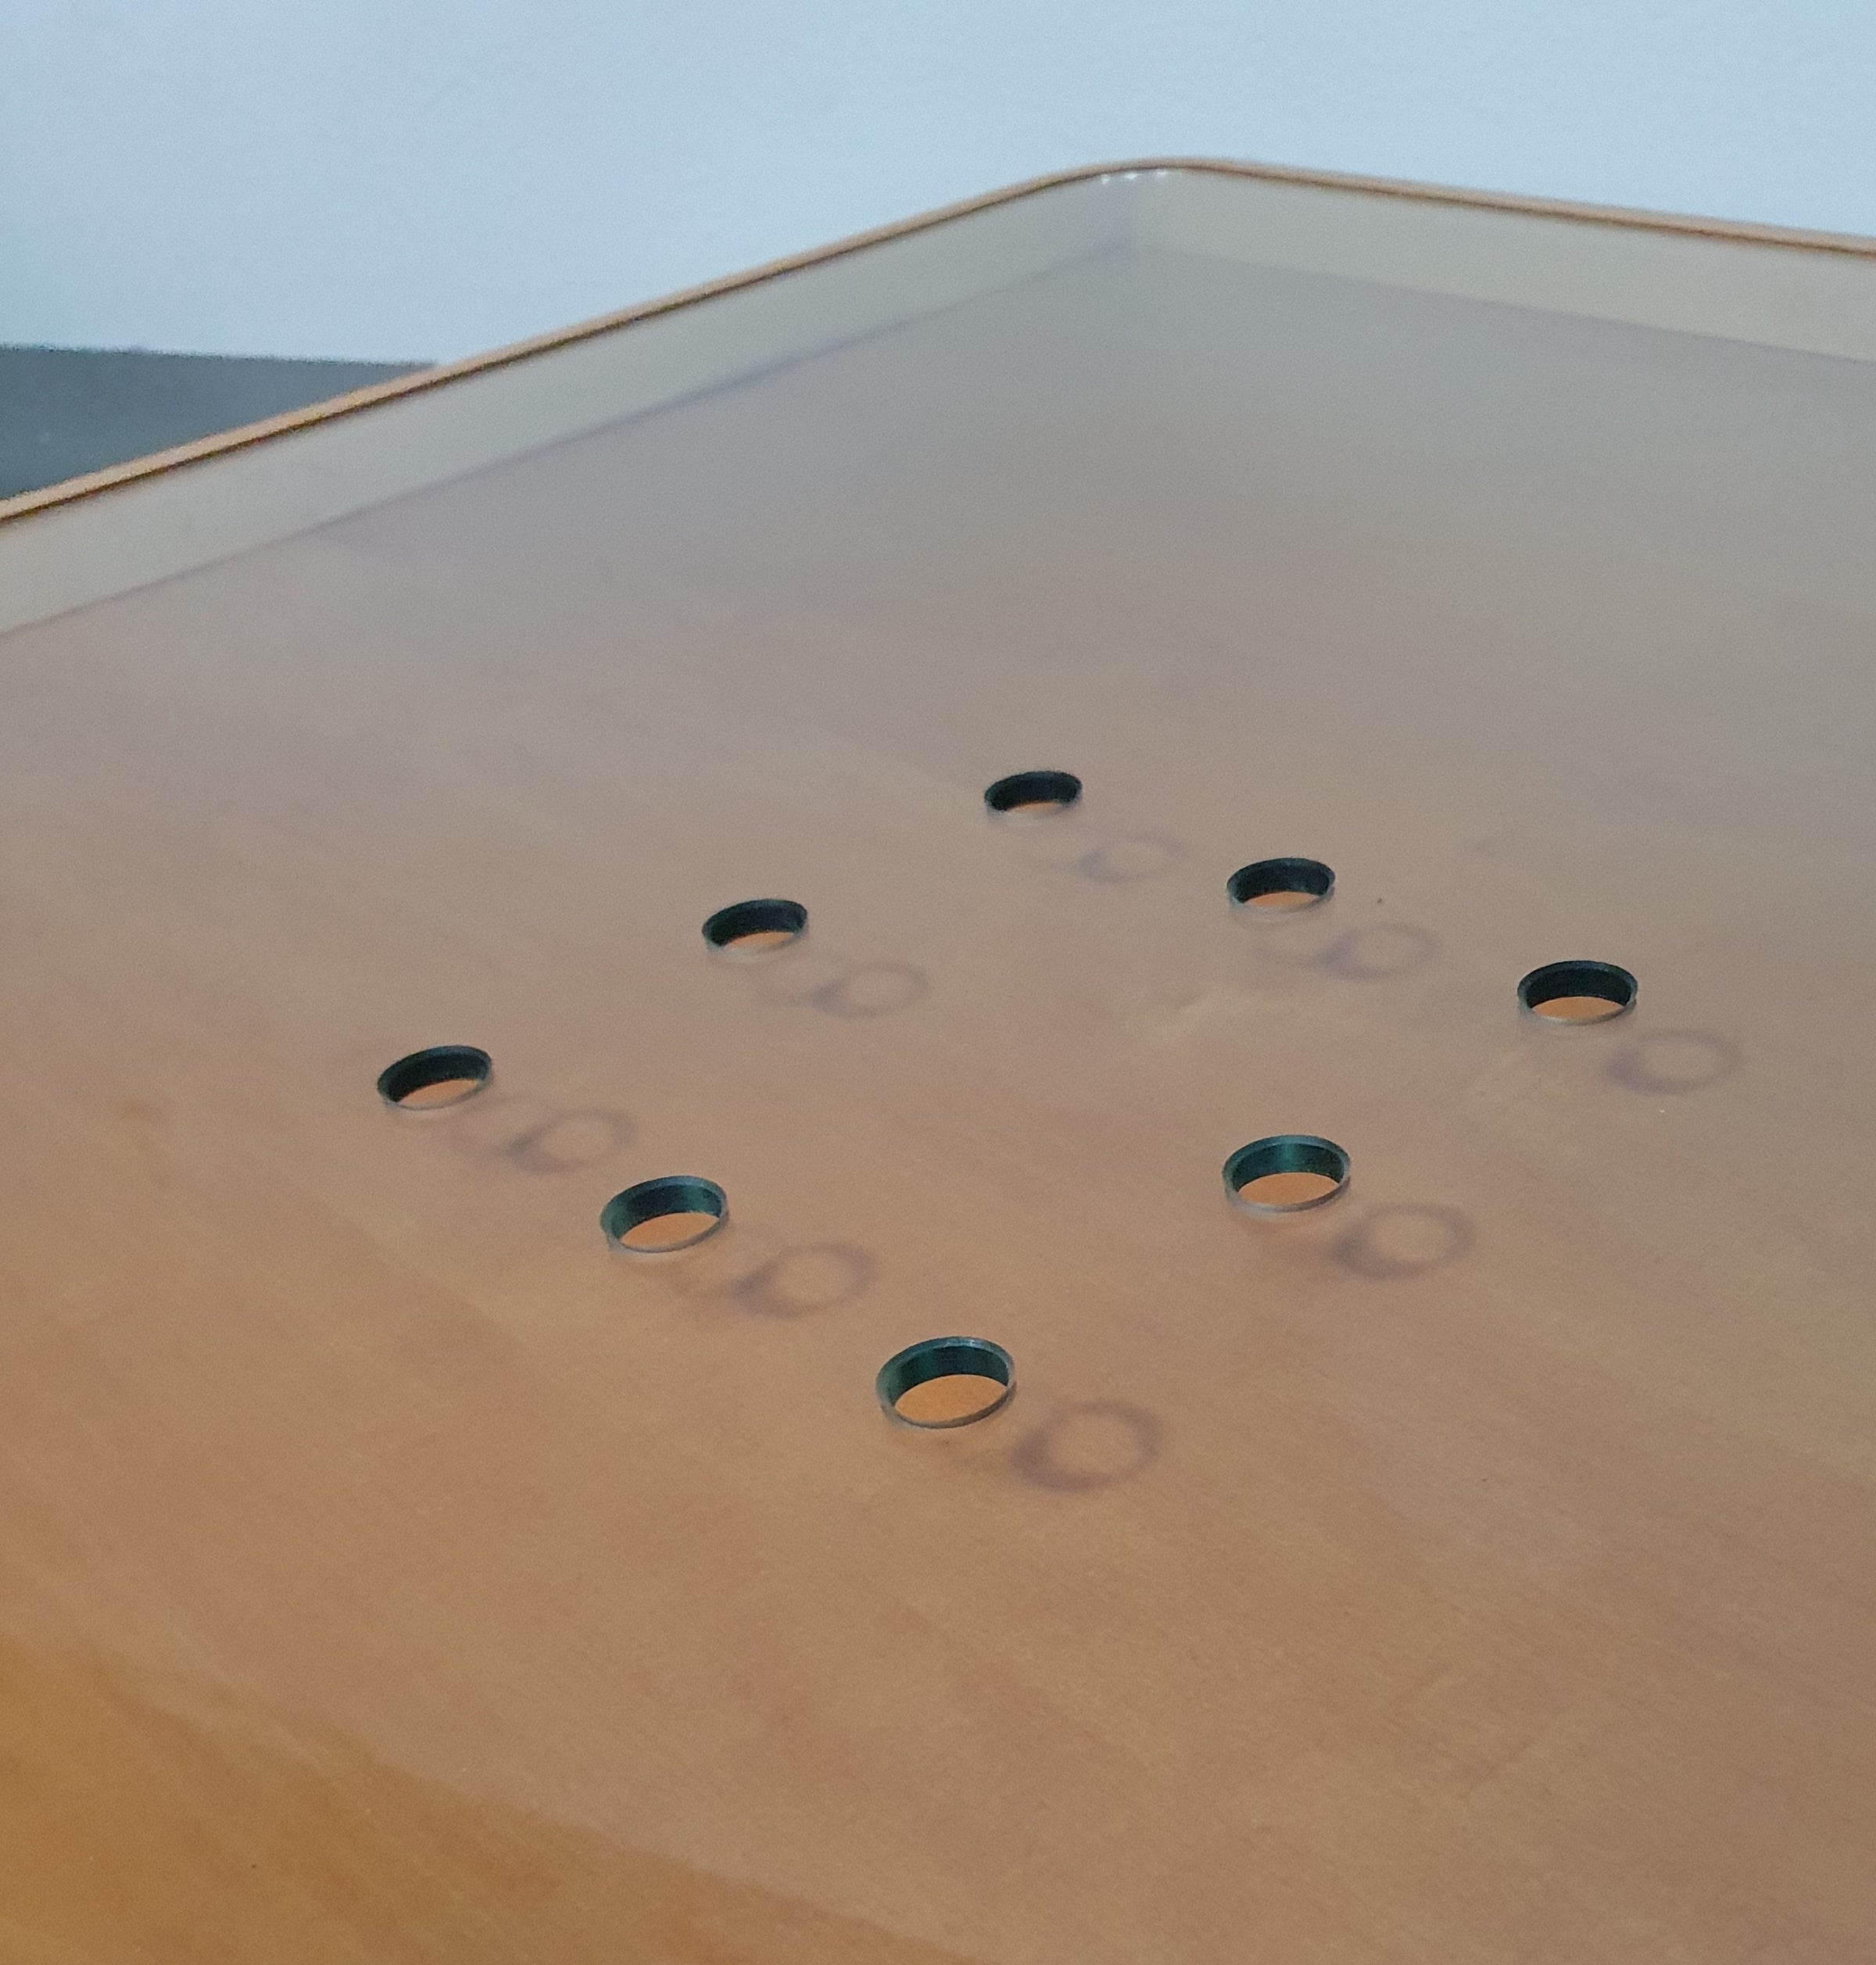 Rare coffee table 110 x 110 x height 35 cm
with 8 flange wooden / cork caps in the glass top.